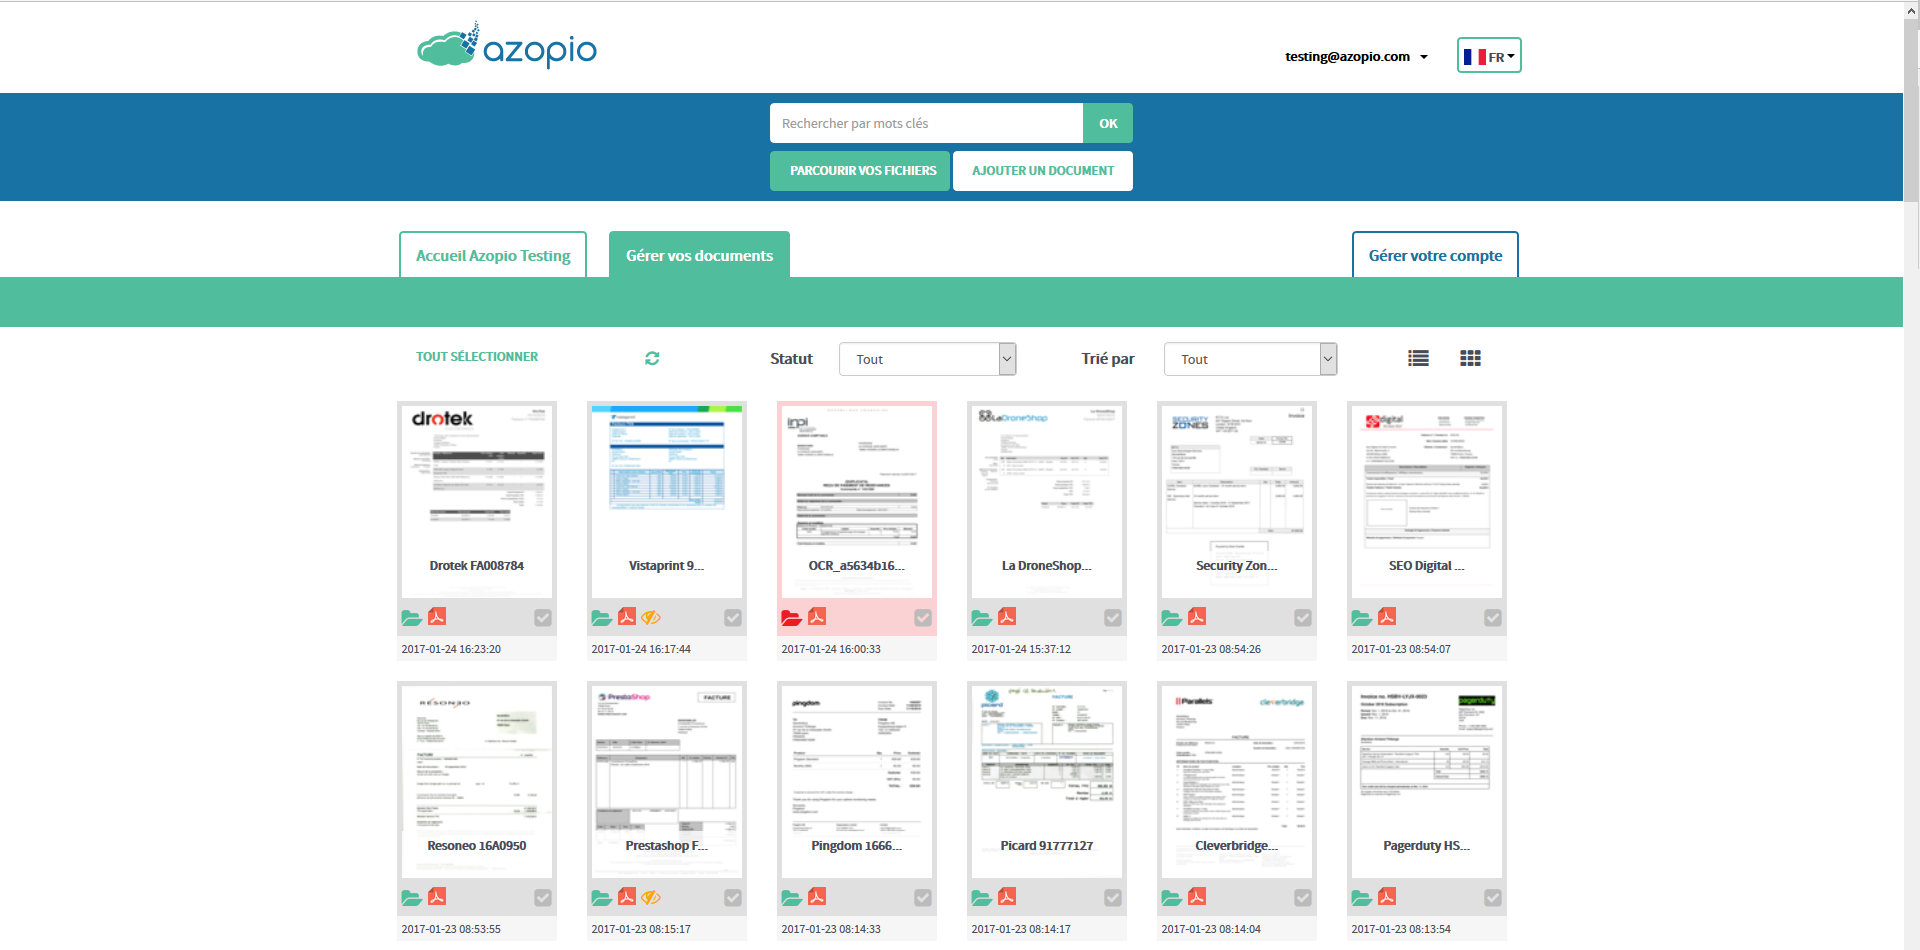 Azopio - The user can see in a glance the documents automatically downloaded to the Azopio intuitive interface. It can easily know their status and launch specific research